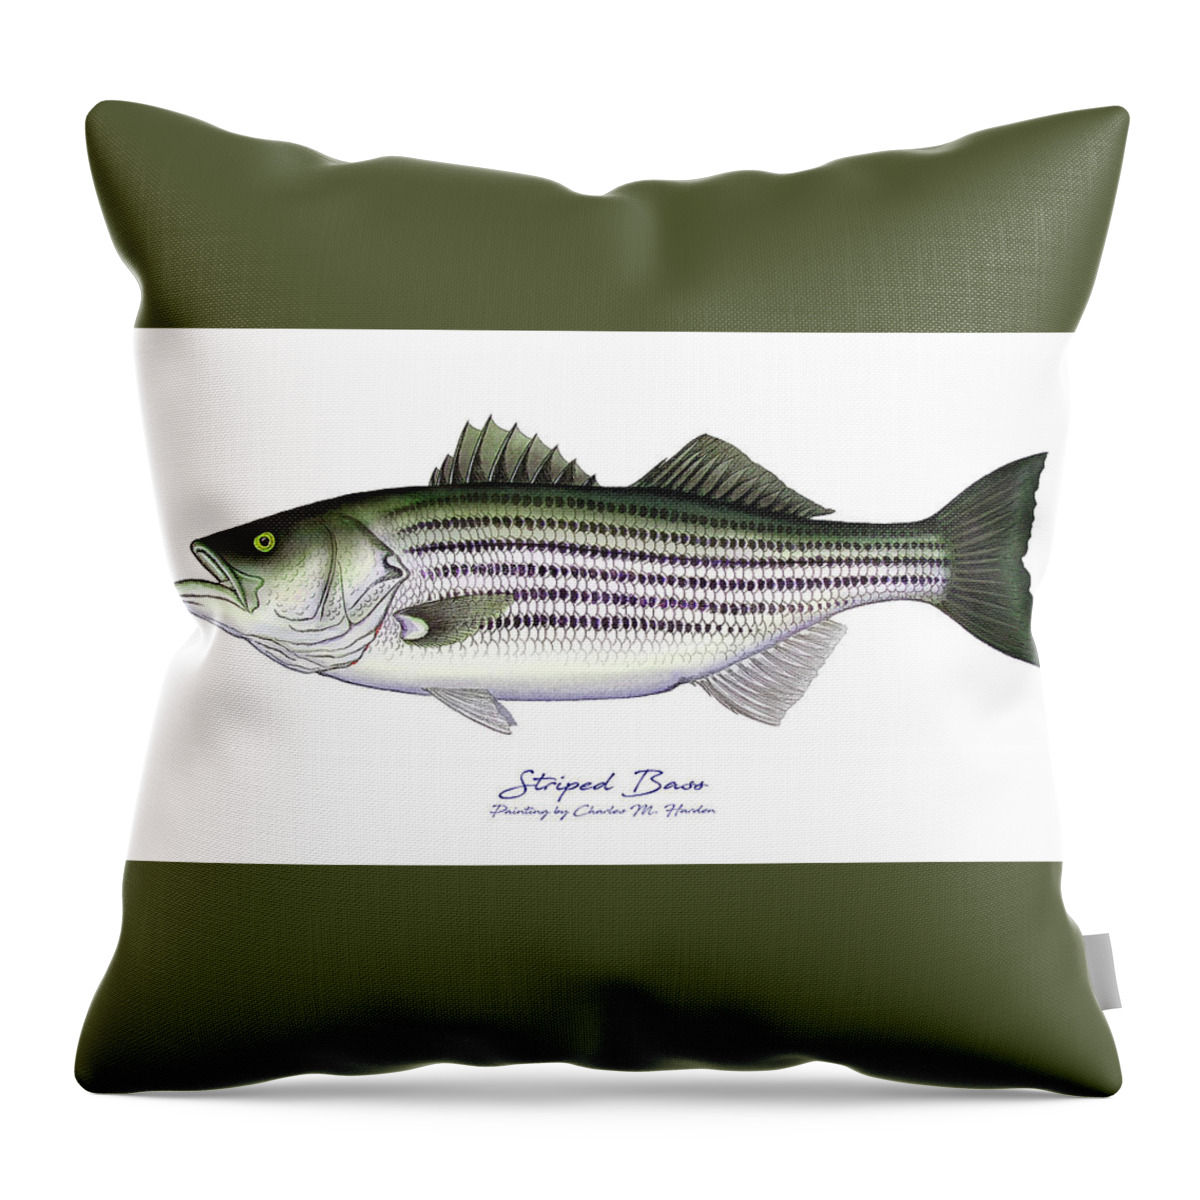 Striped Bass Art Throw Pillow featuring the painting Striped Bass by Charles Harden